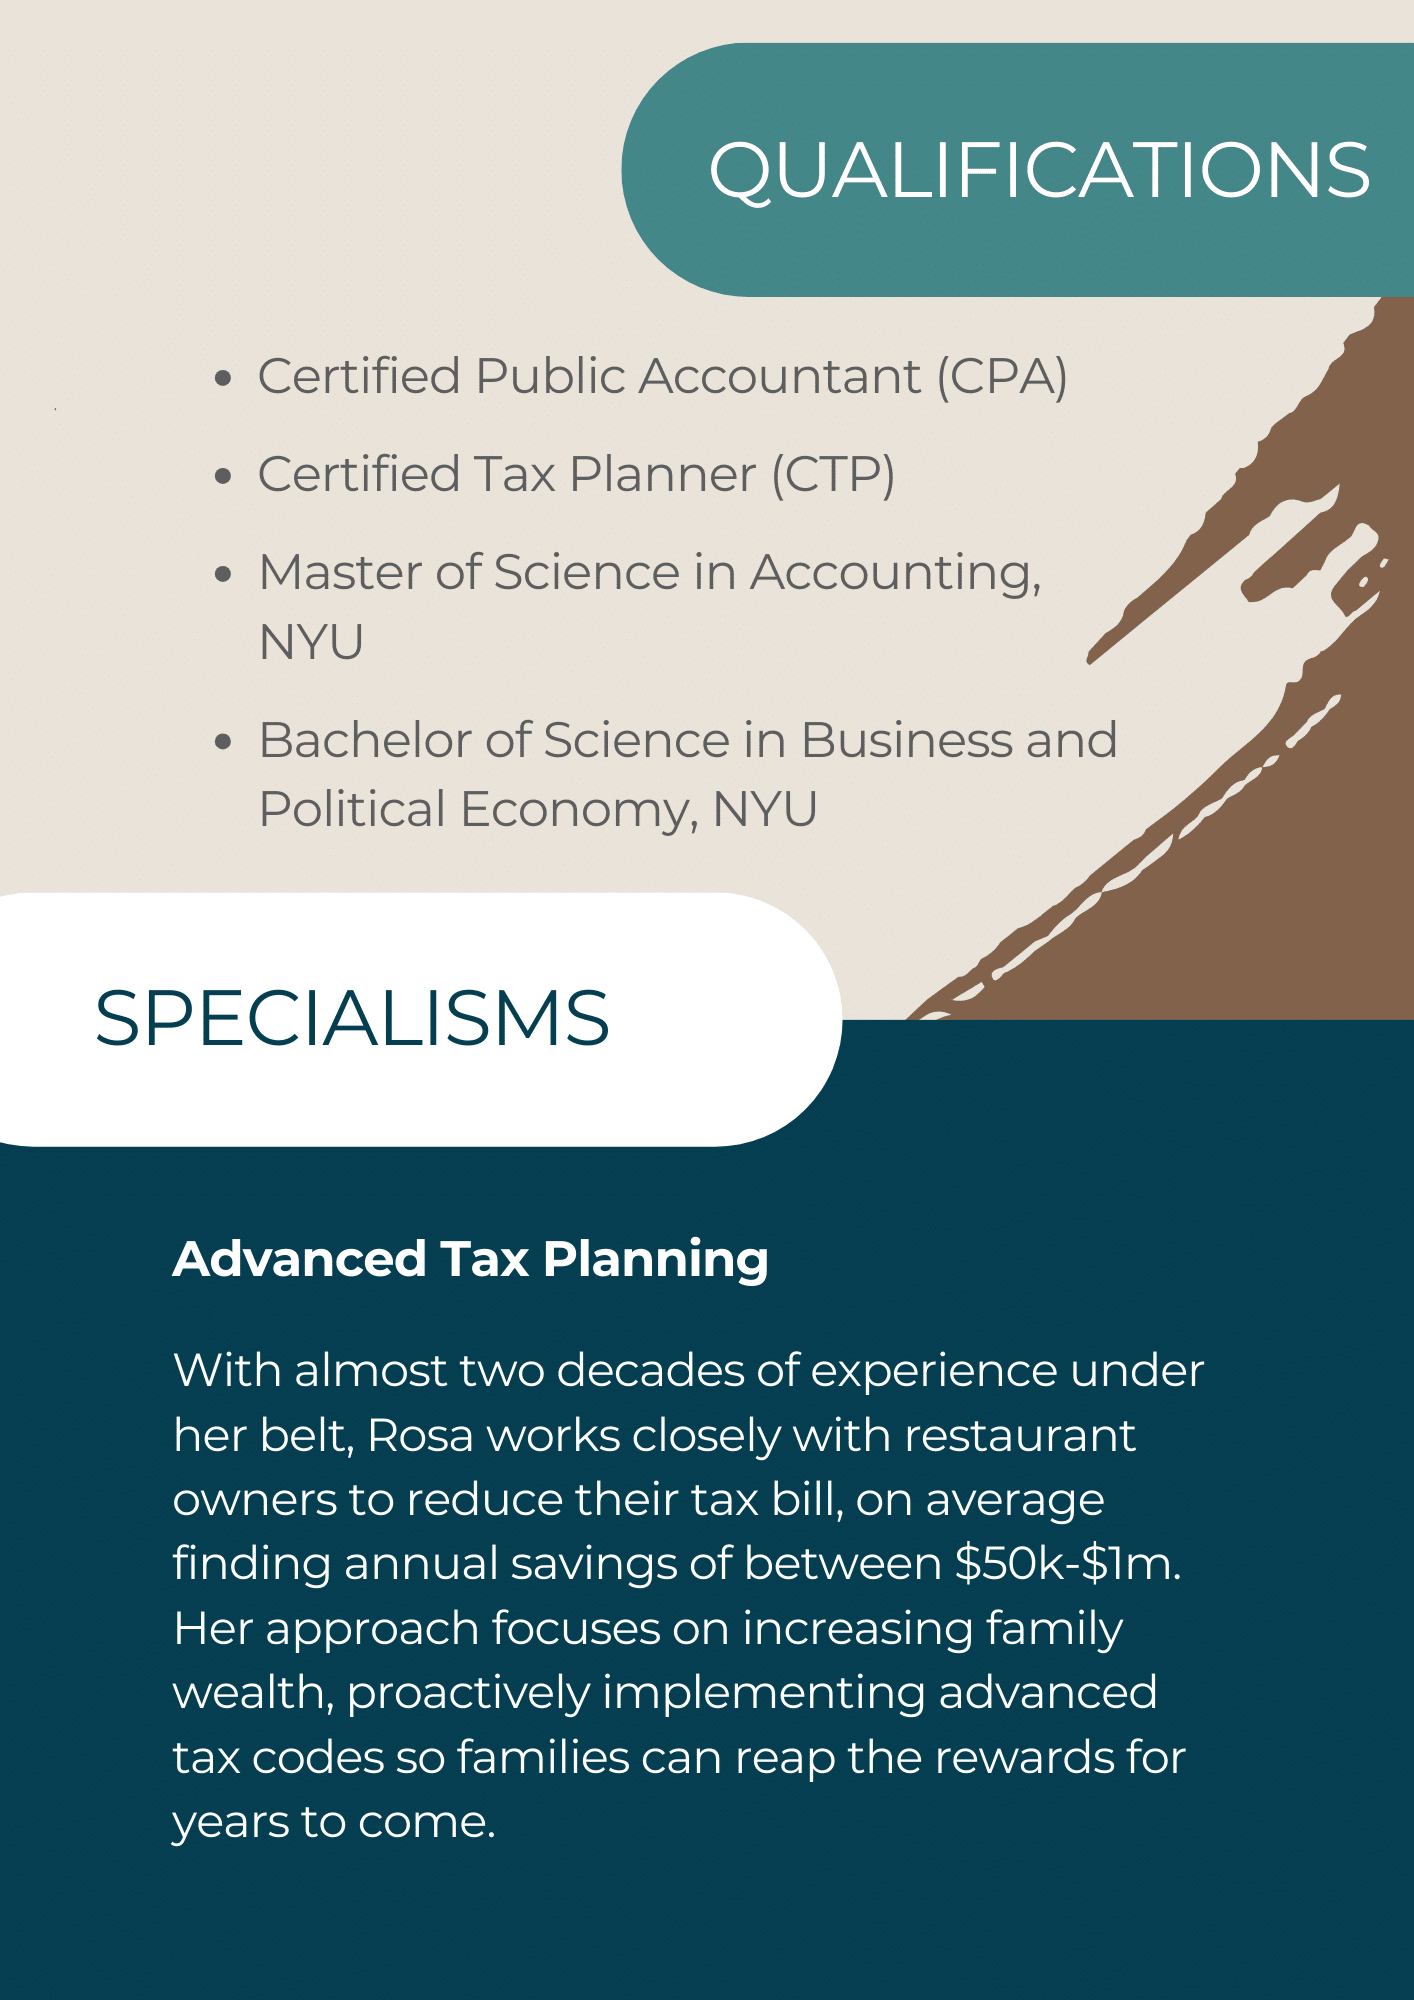 Qualifications page example for media kit